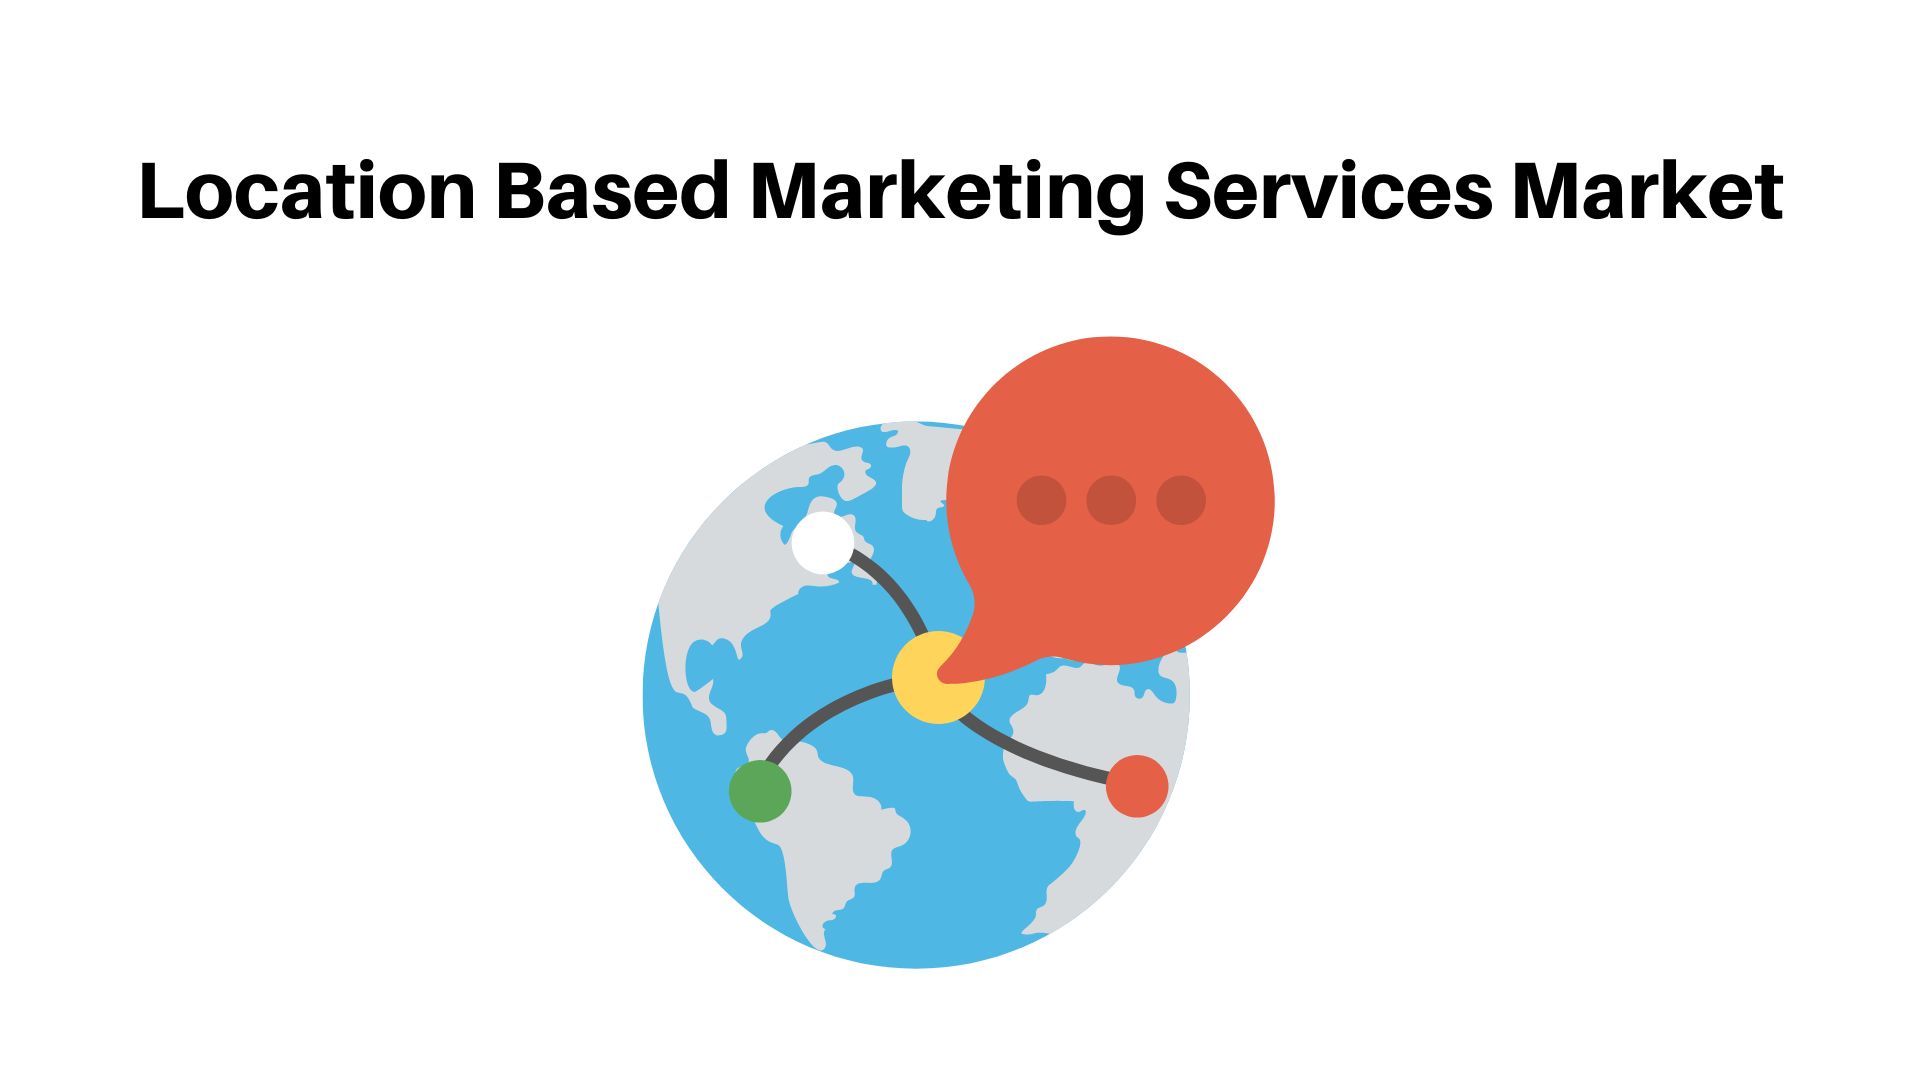 Location Based Marketing Services Market to develop strongly and.